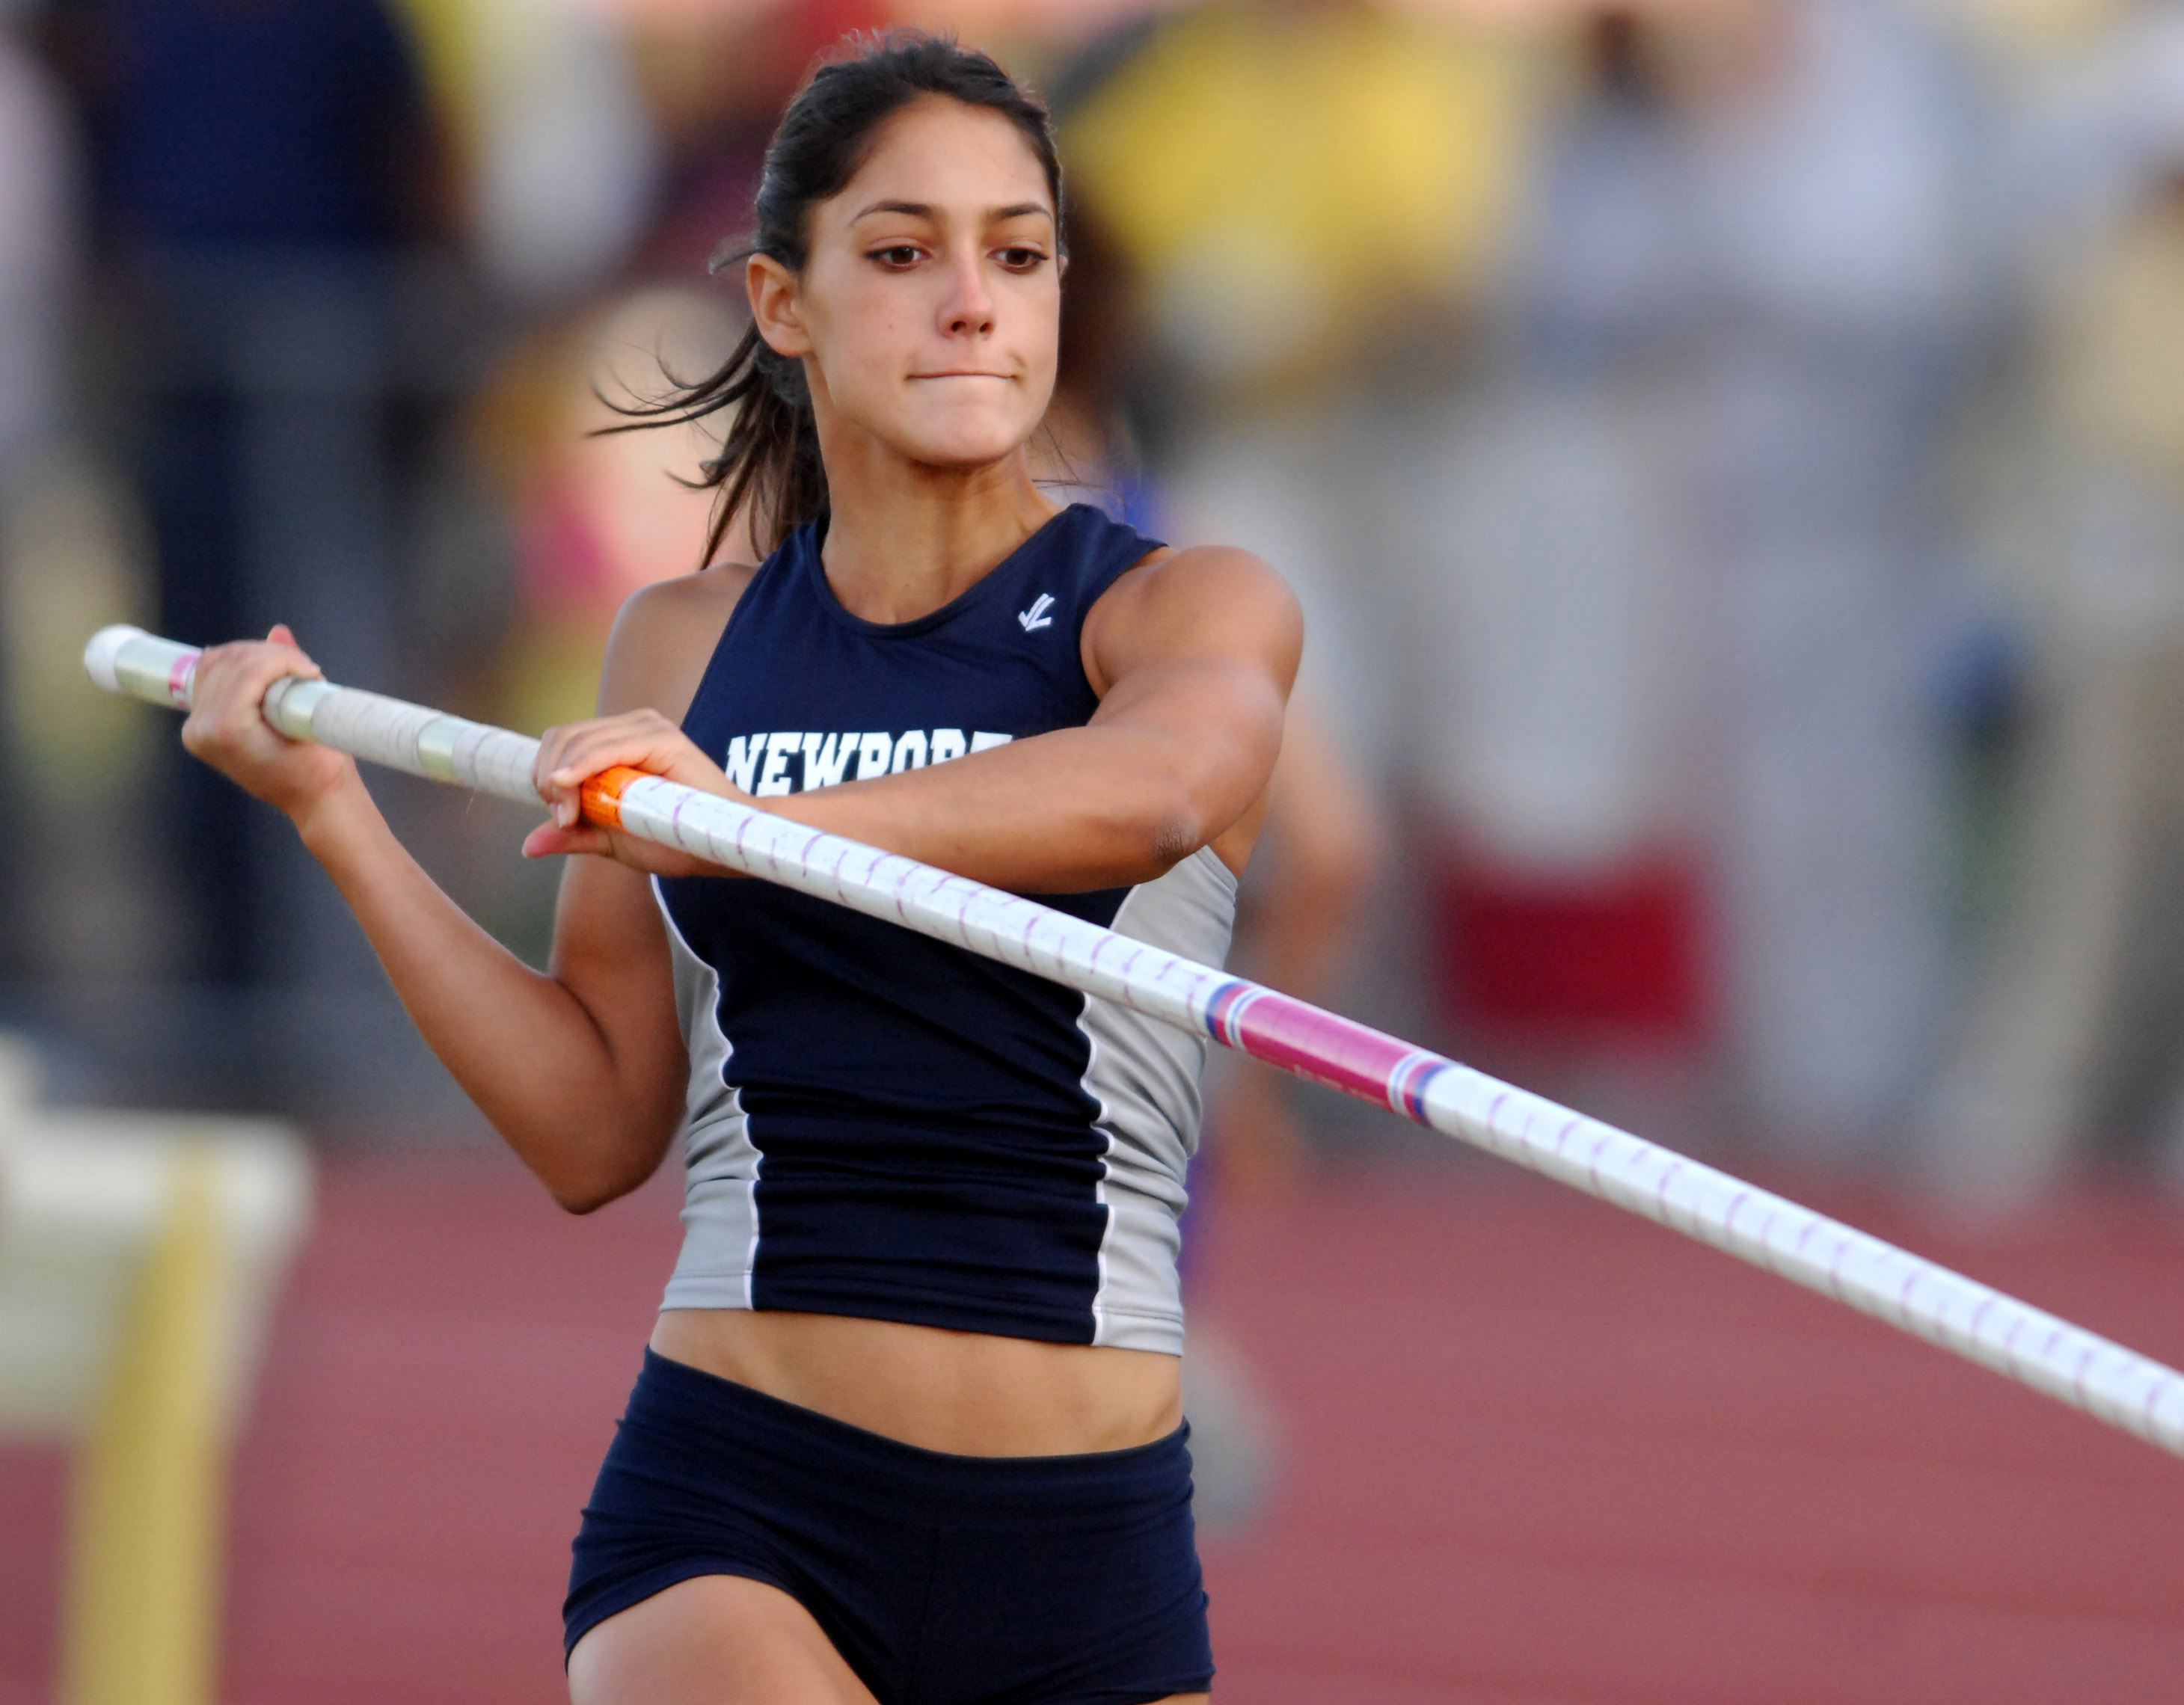 Pictures Of Allison Stokke.